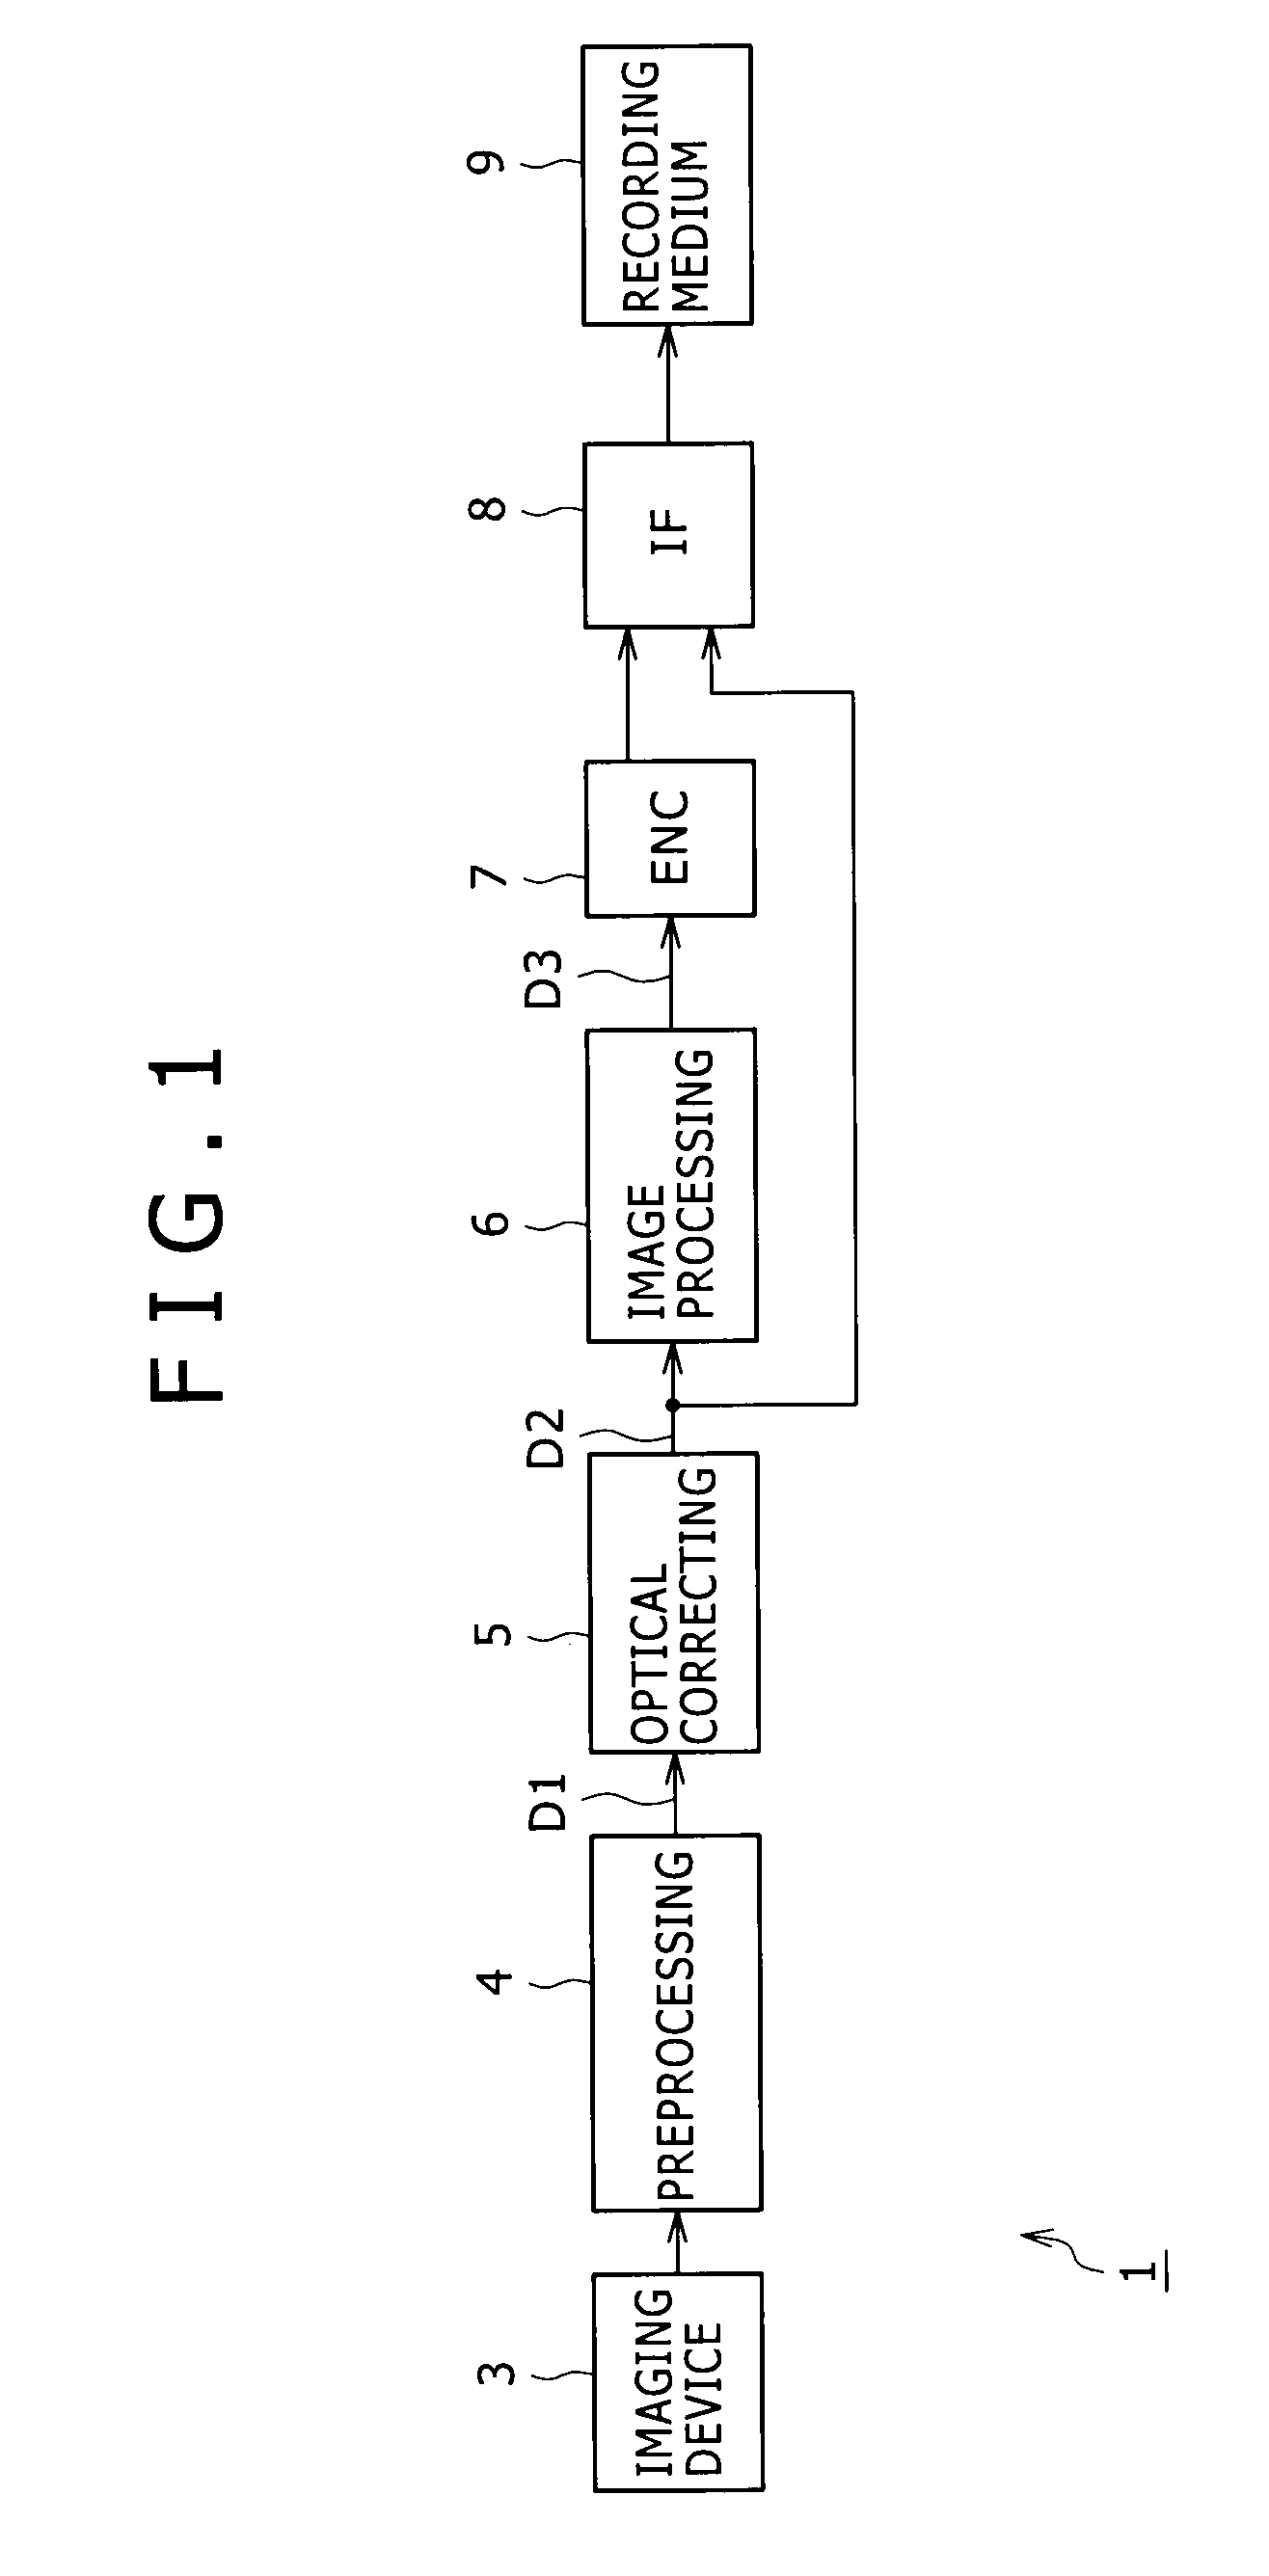 Imaging device, image processing device, image processing method, program for image processing method, and recording medium having program for image processing method recorded thereon